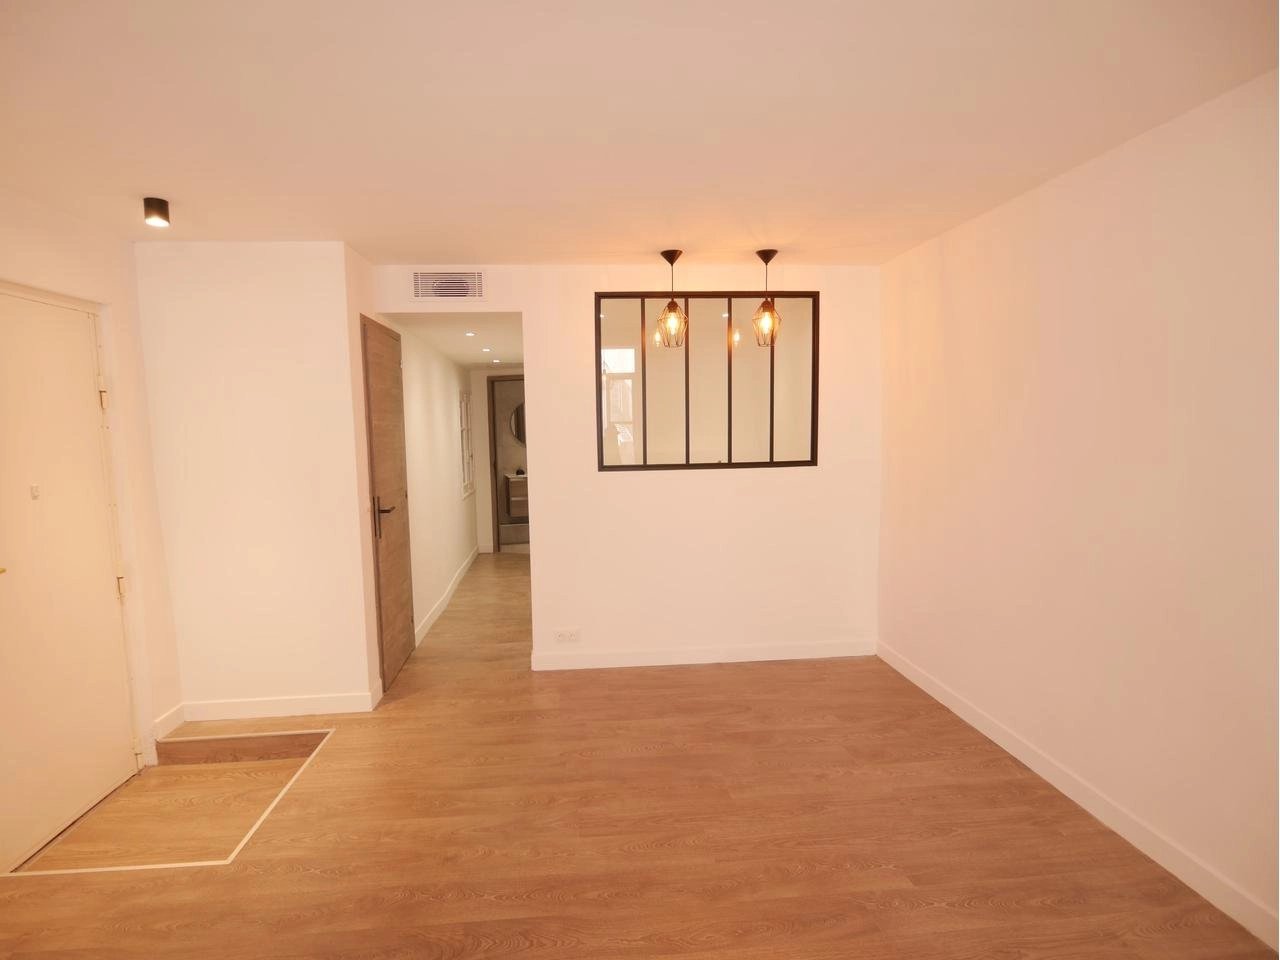 Appartement  2 Rooms 42.94m2  for sale   255 000 €